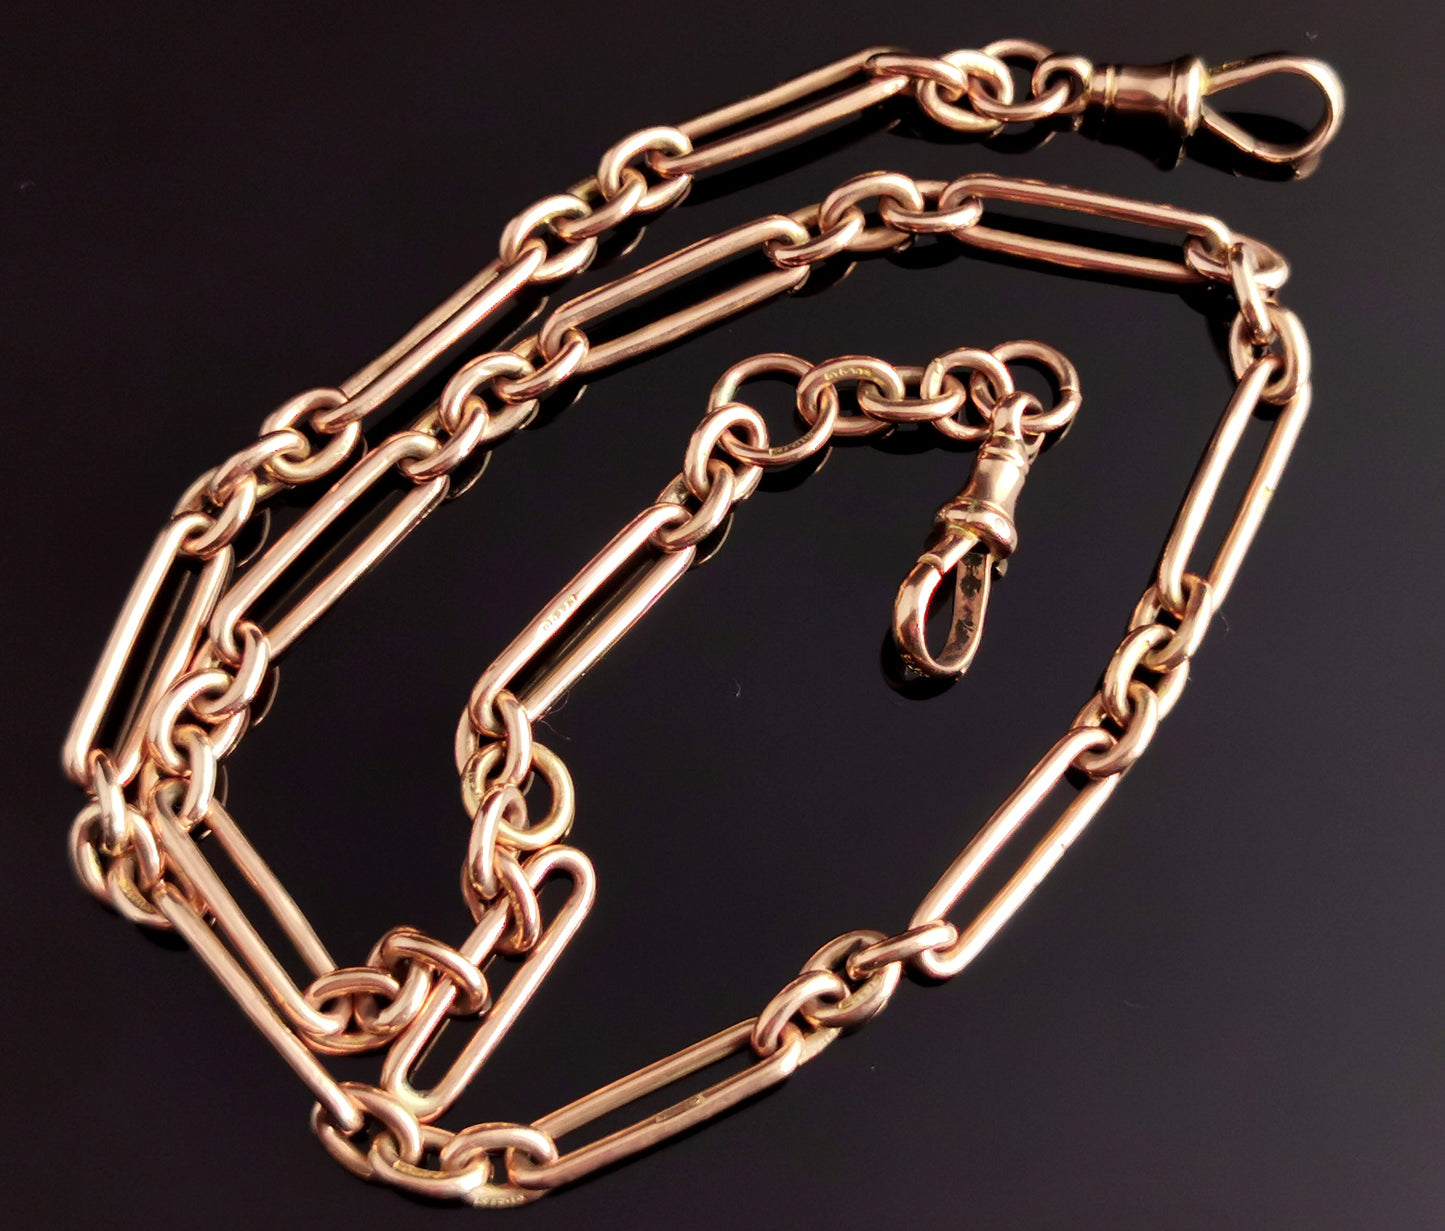 Antique 9ct Rose gold Albert chain, watch chain necklace, Trombone link